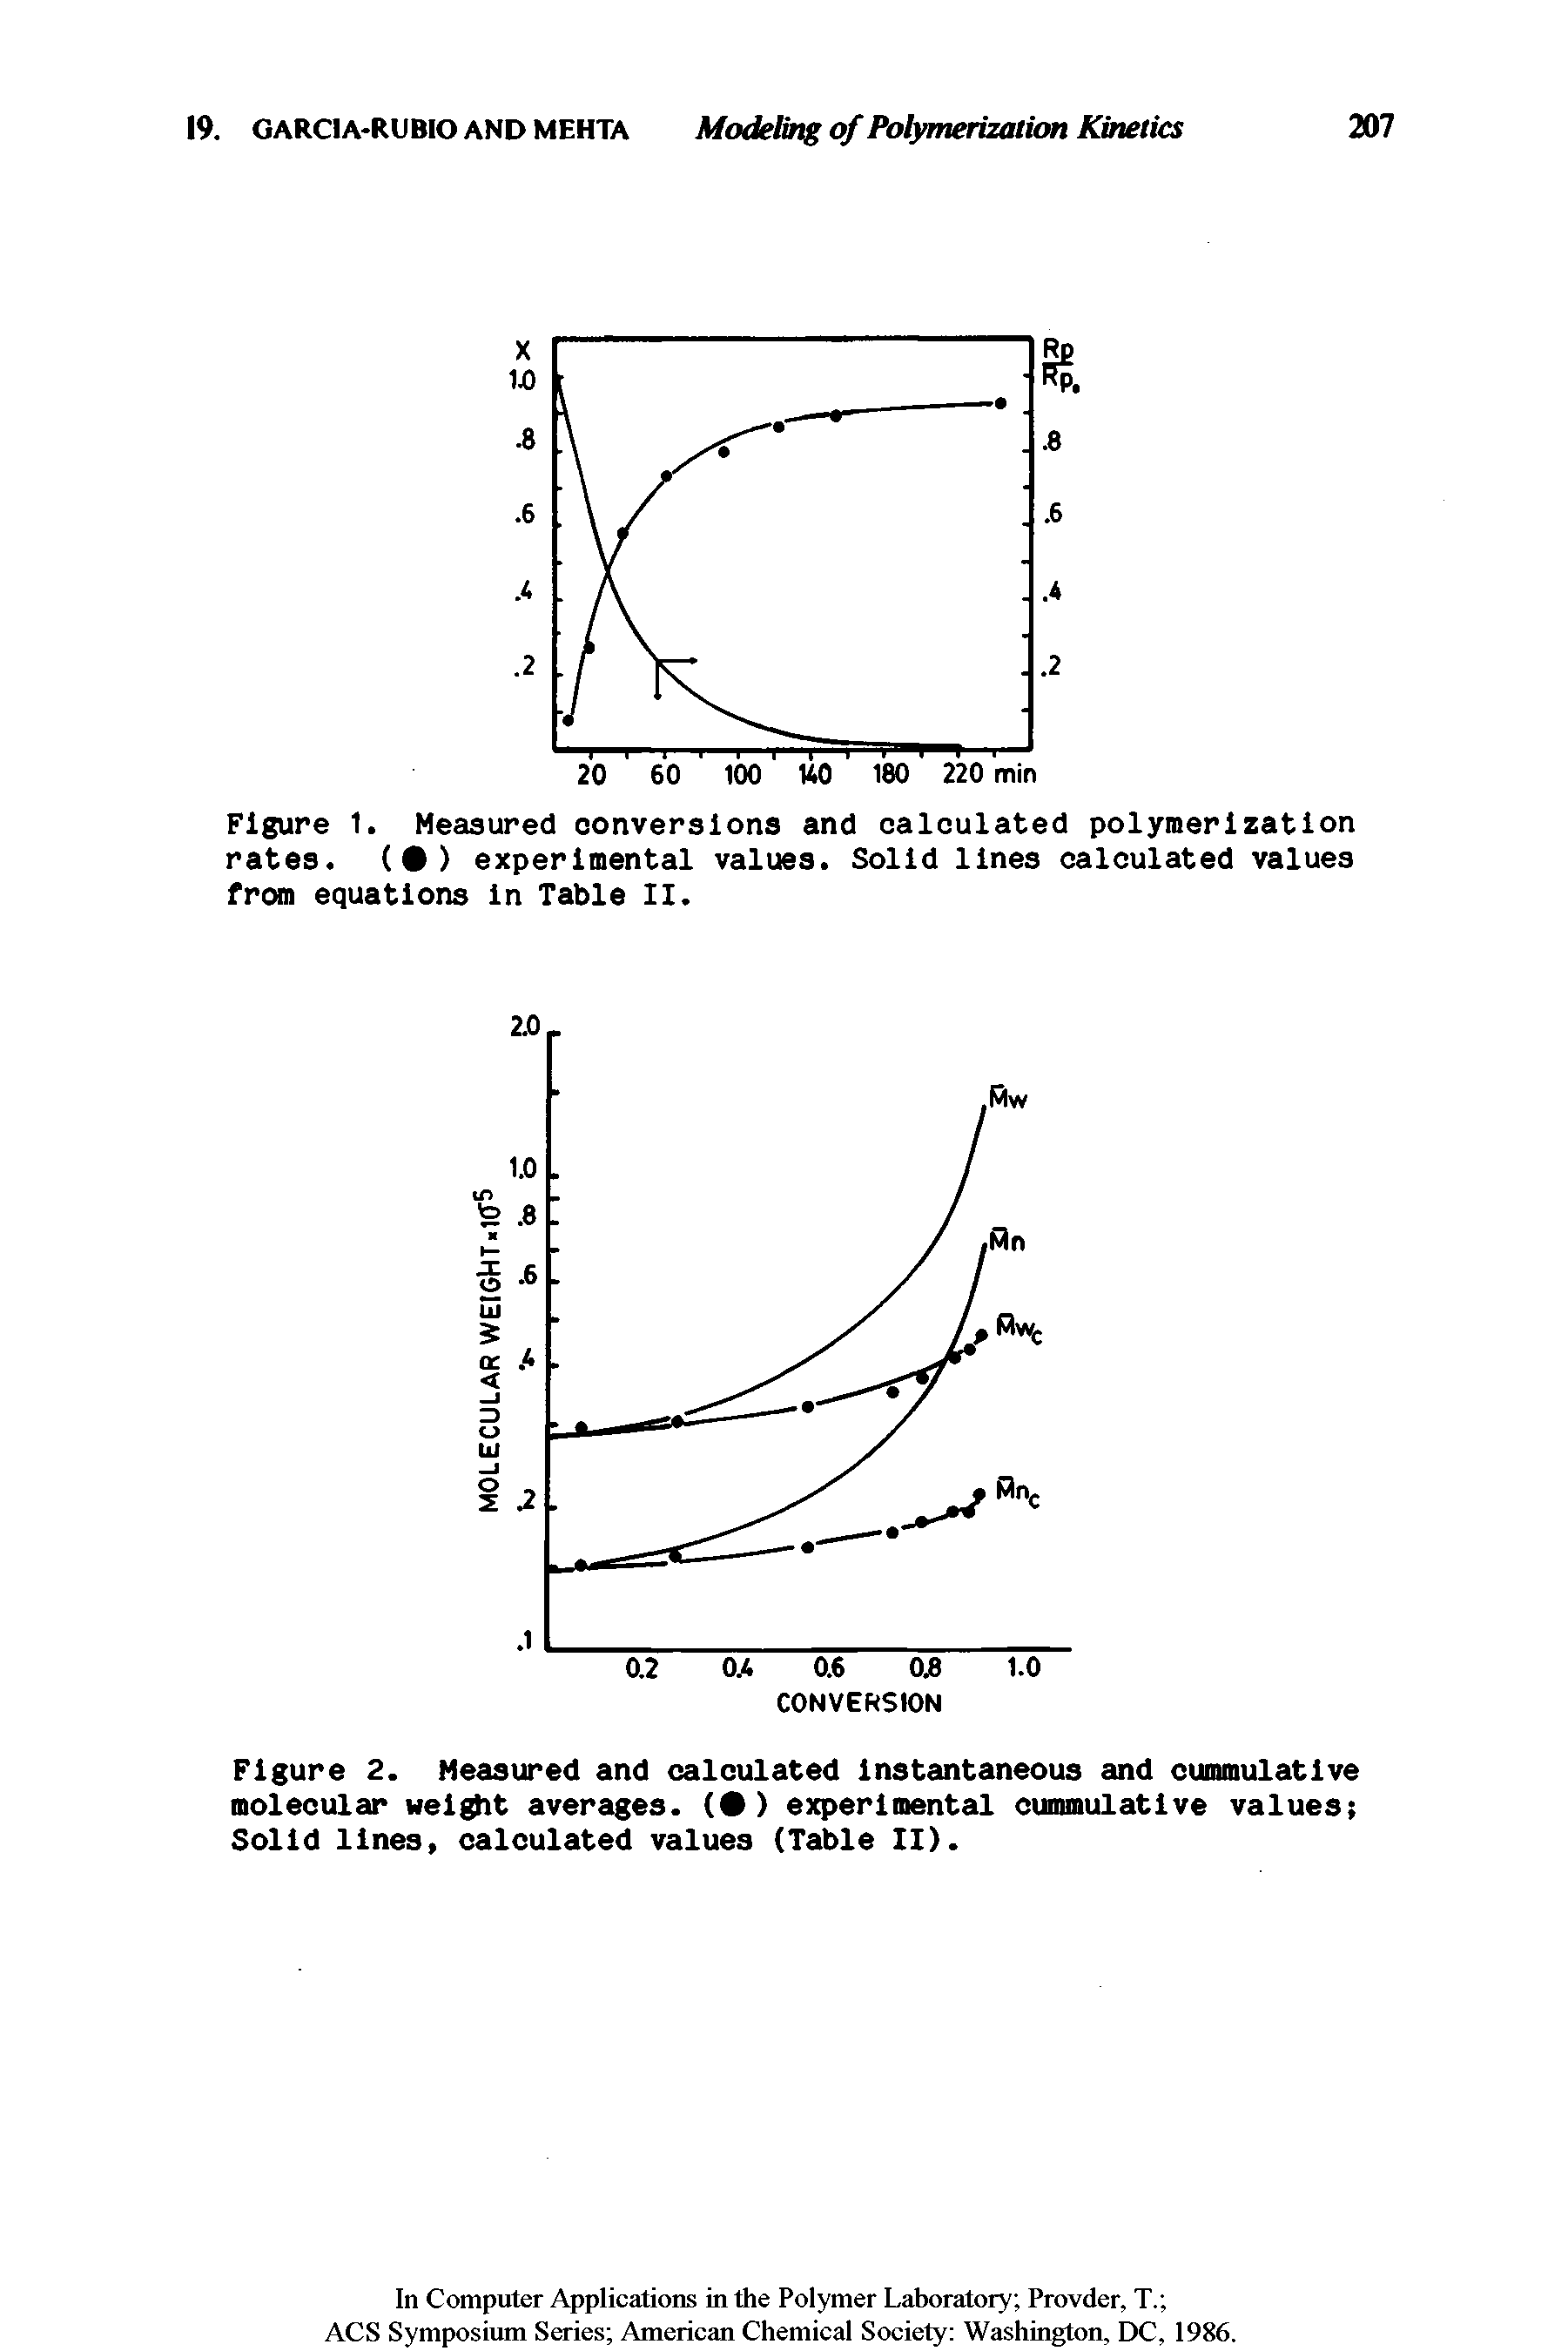 Figure 2. Measured and calculated instantaneous and cummulative molecular weight averages. ( ) experimental cummulative values Solid lines, calculated values (Table II).